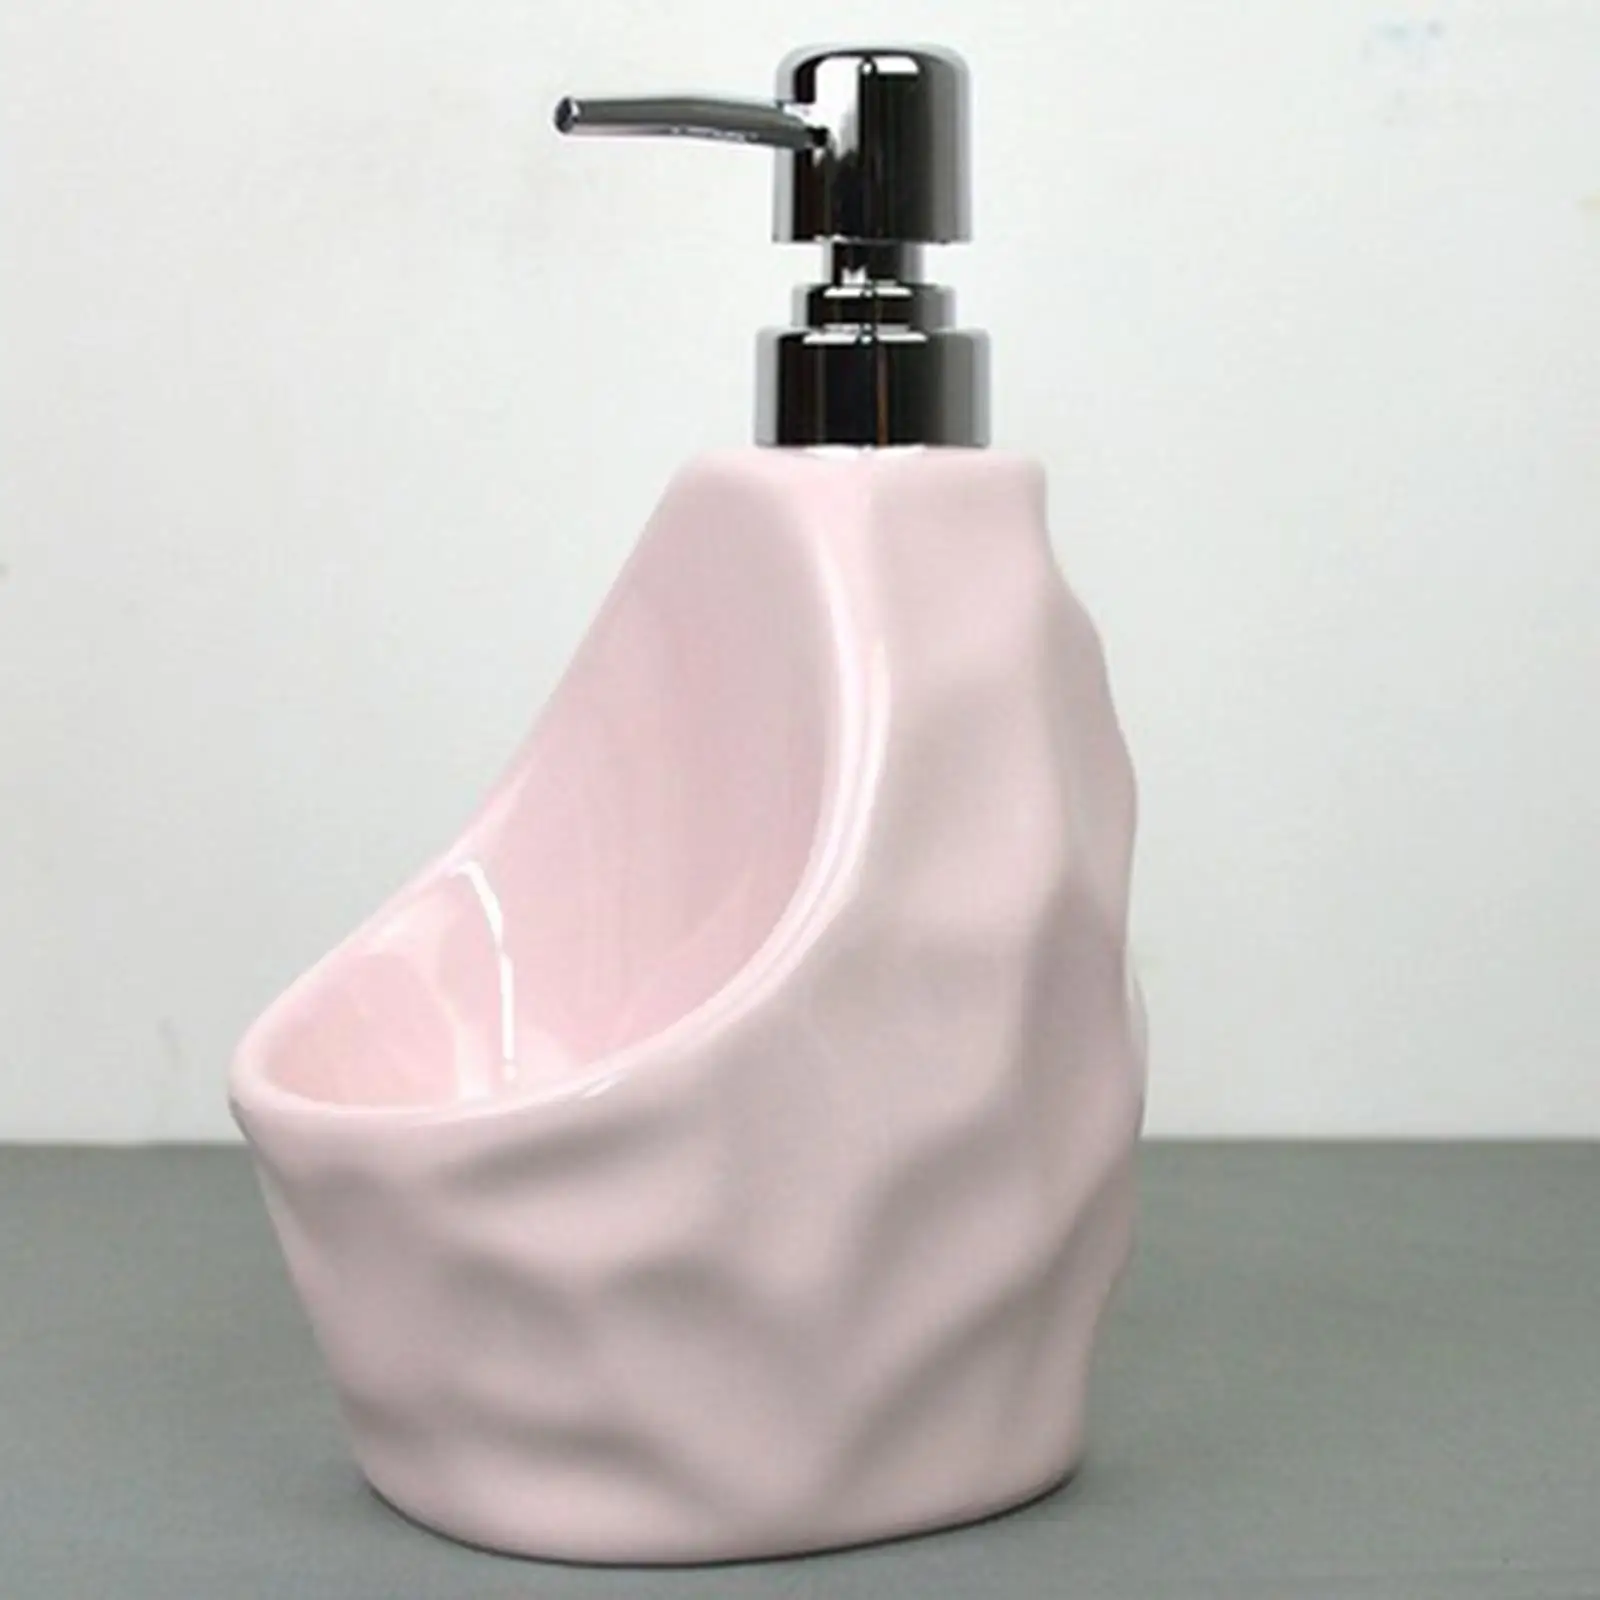 Soap Dispenser Refillable Kitchen Accessories Holder Pump Bottle for Lotion Hand Soap Body Wash Essential Oil Sink Countertop